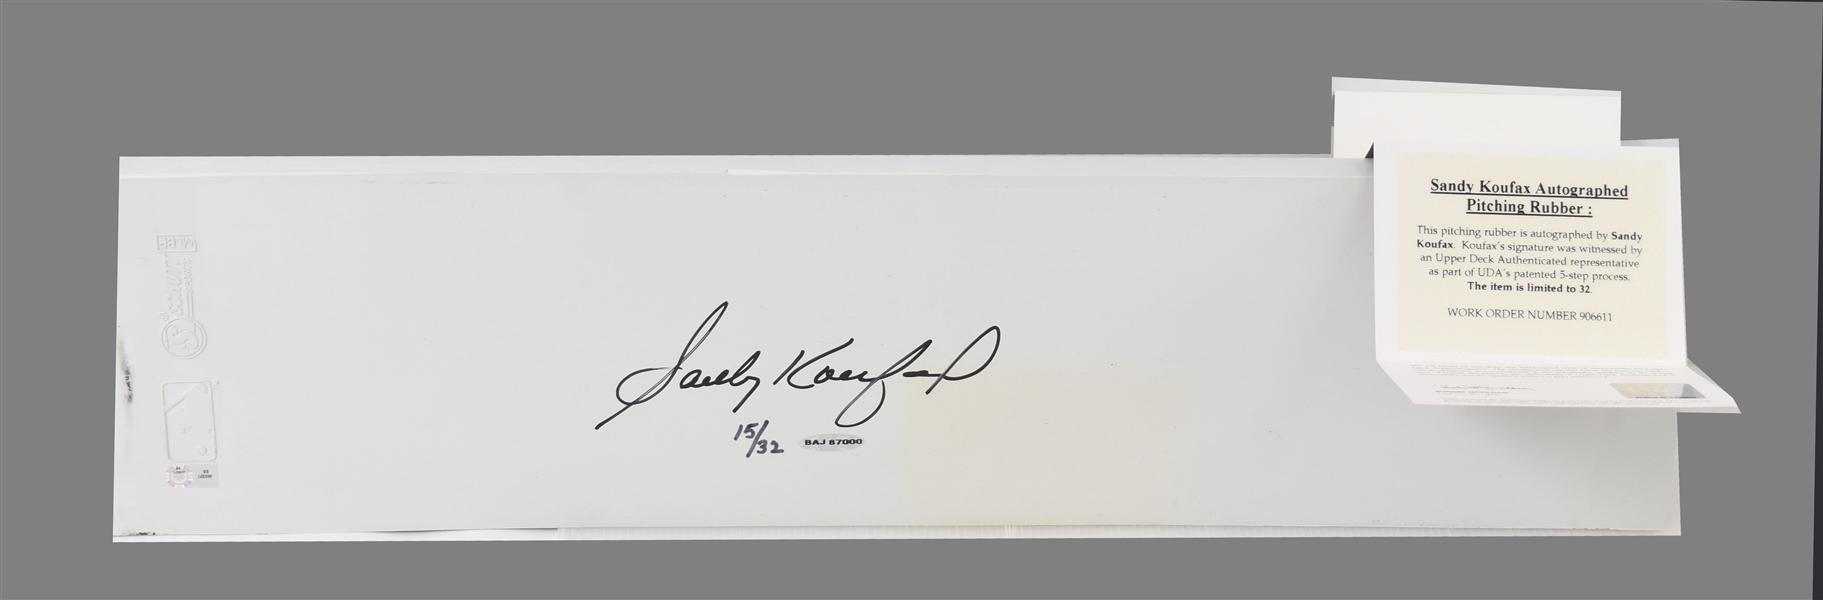 Sandy Koufax Full-size authentic pitching rubber (24 x 6) made by Schutt Sports.